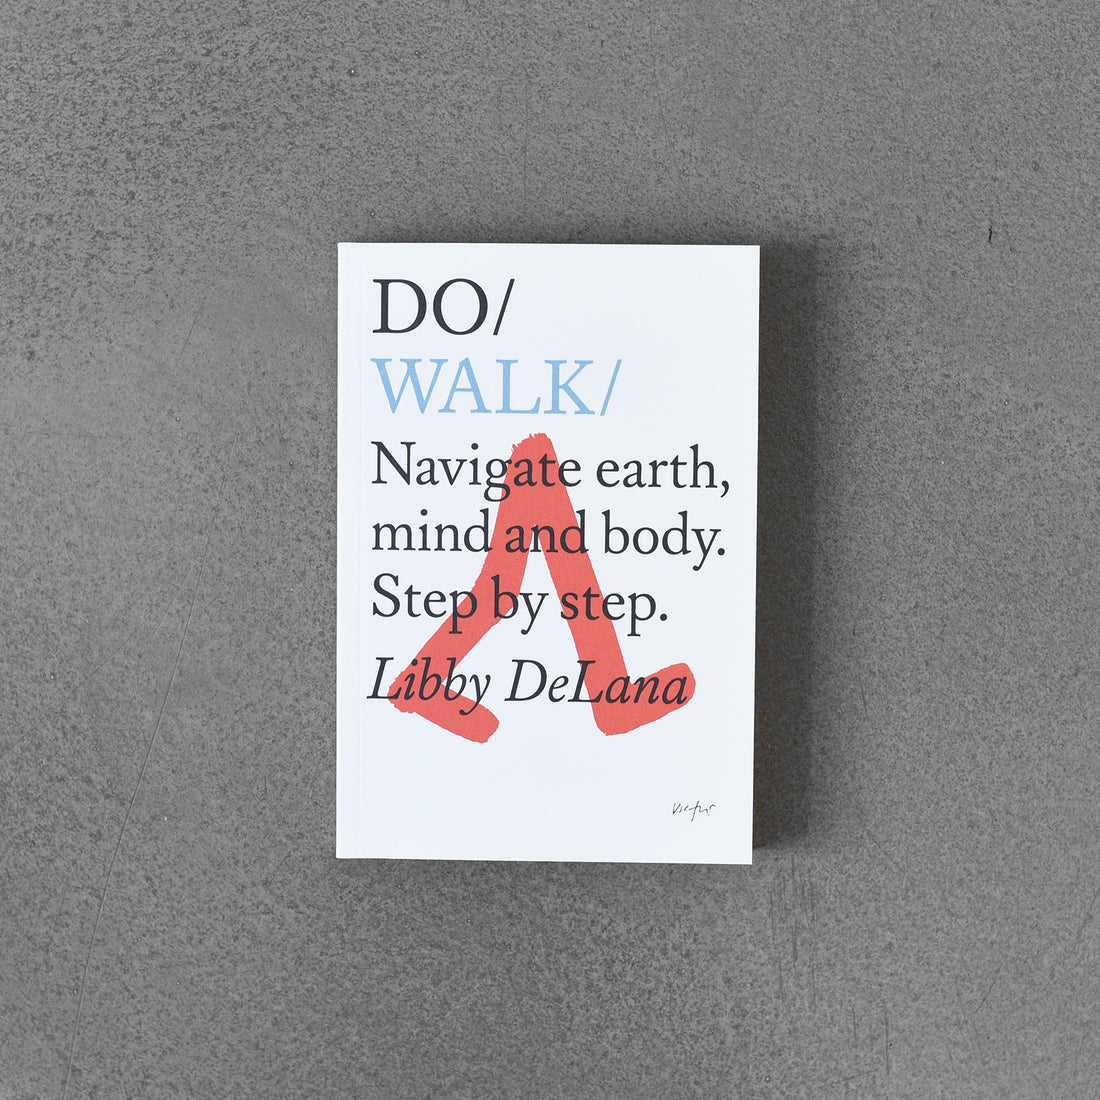 Do / Walk: Navigate earth, mind and body. Step by step.